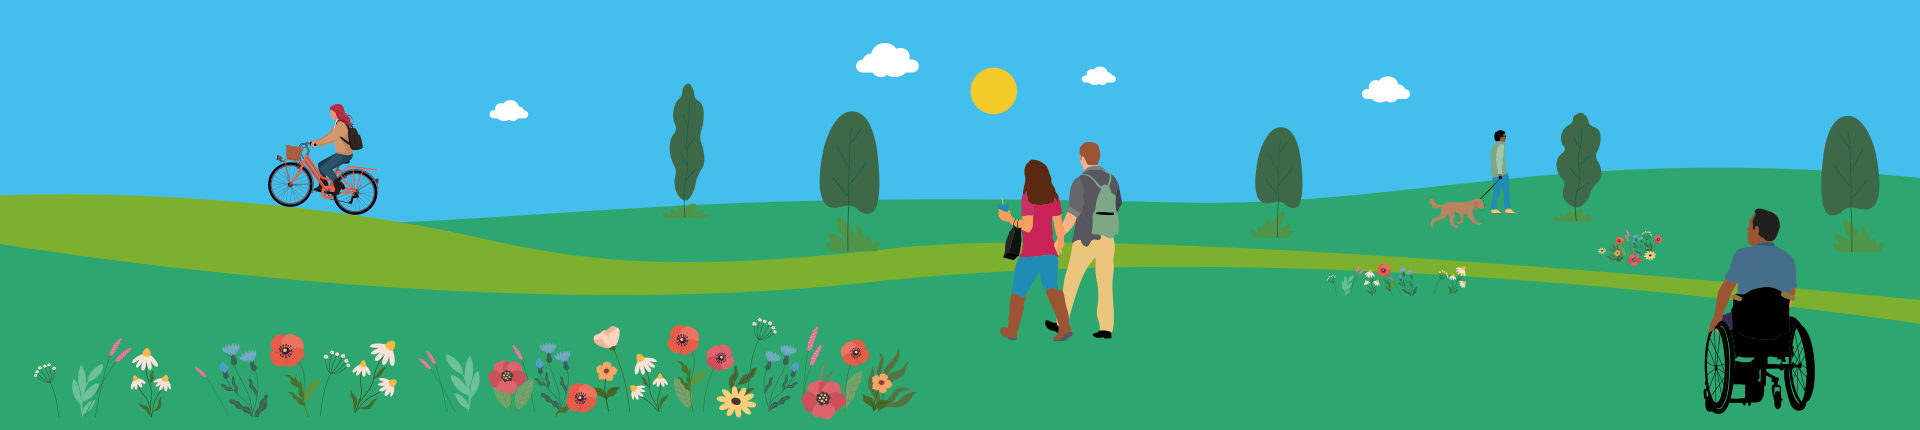 A couple walking, a person with a dog and a cyclist against a green backdrop including trees and flowers and a blue sky with a sun and clouds